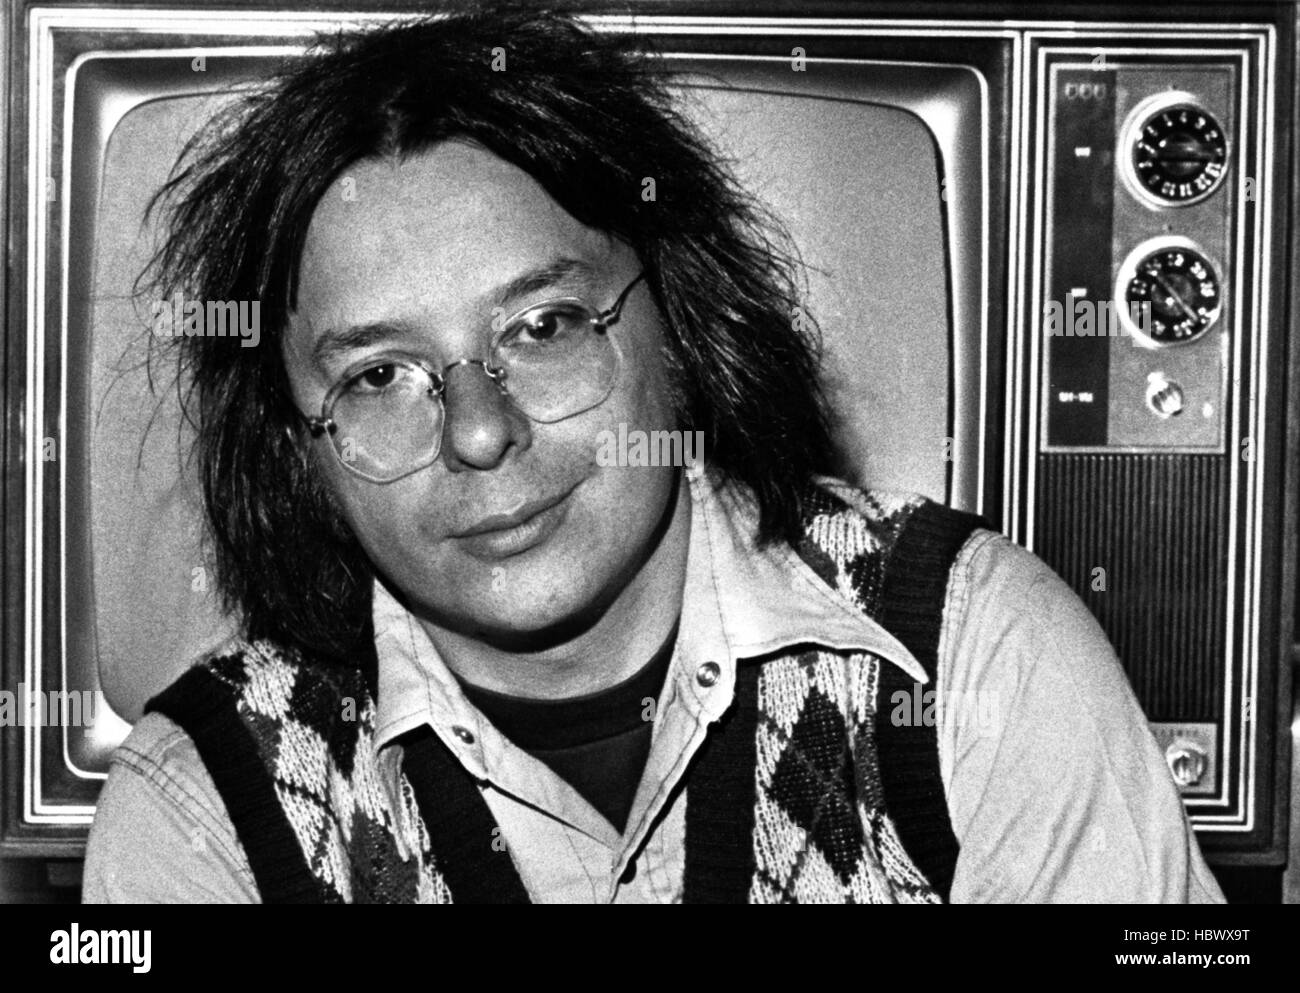 THE GROOVE TUBE, Ken Shapiro (writer, producer, director and star of film),  1974 Stock Photo - Alamy